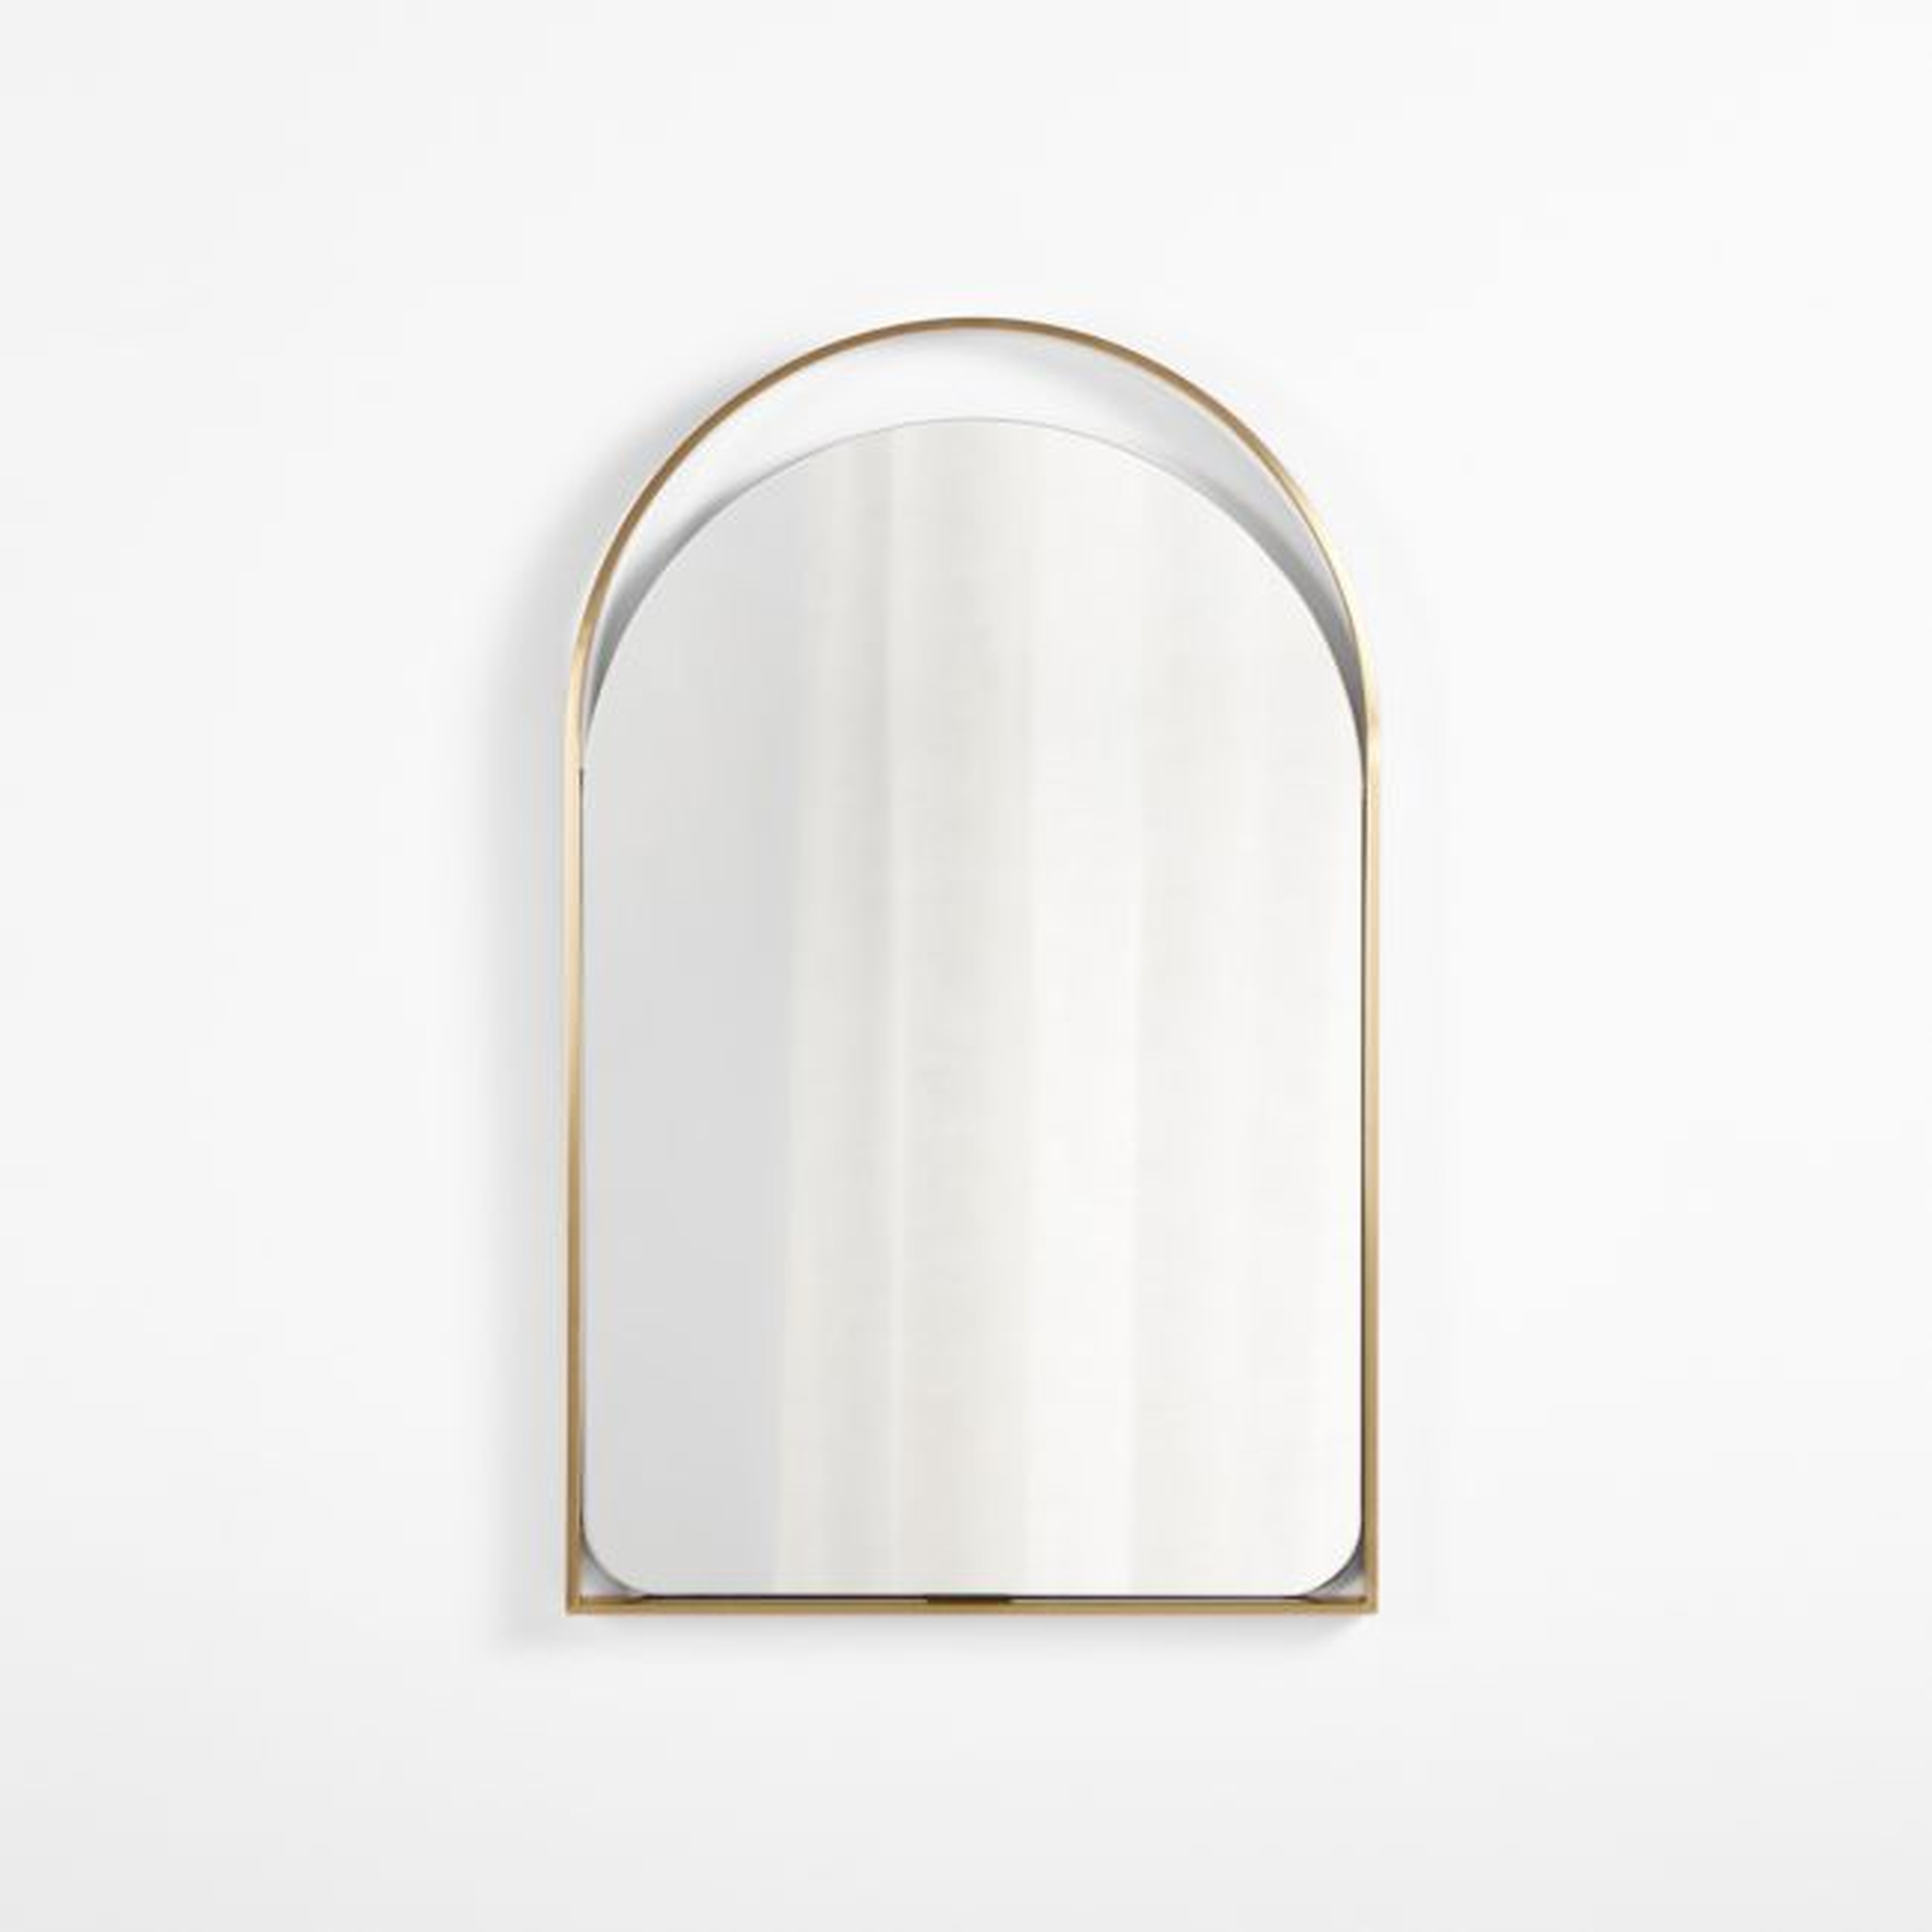 Aosta Brass Wall Mirror - Crate and Barrel